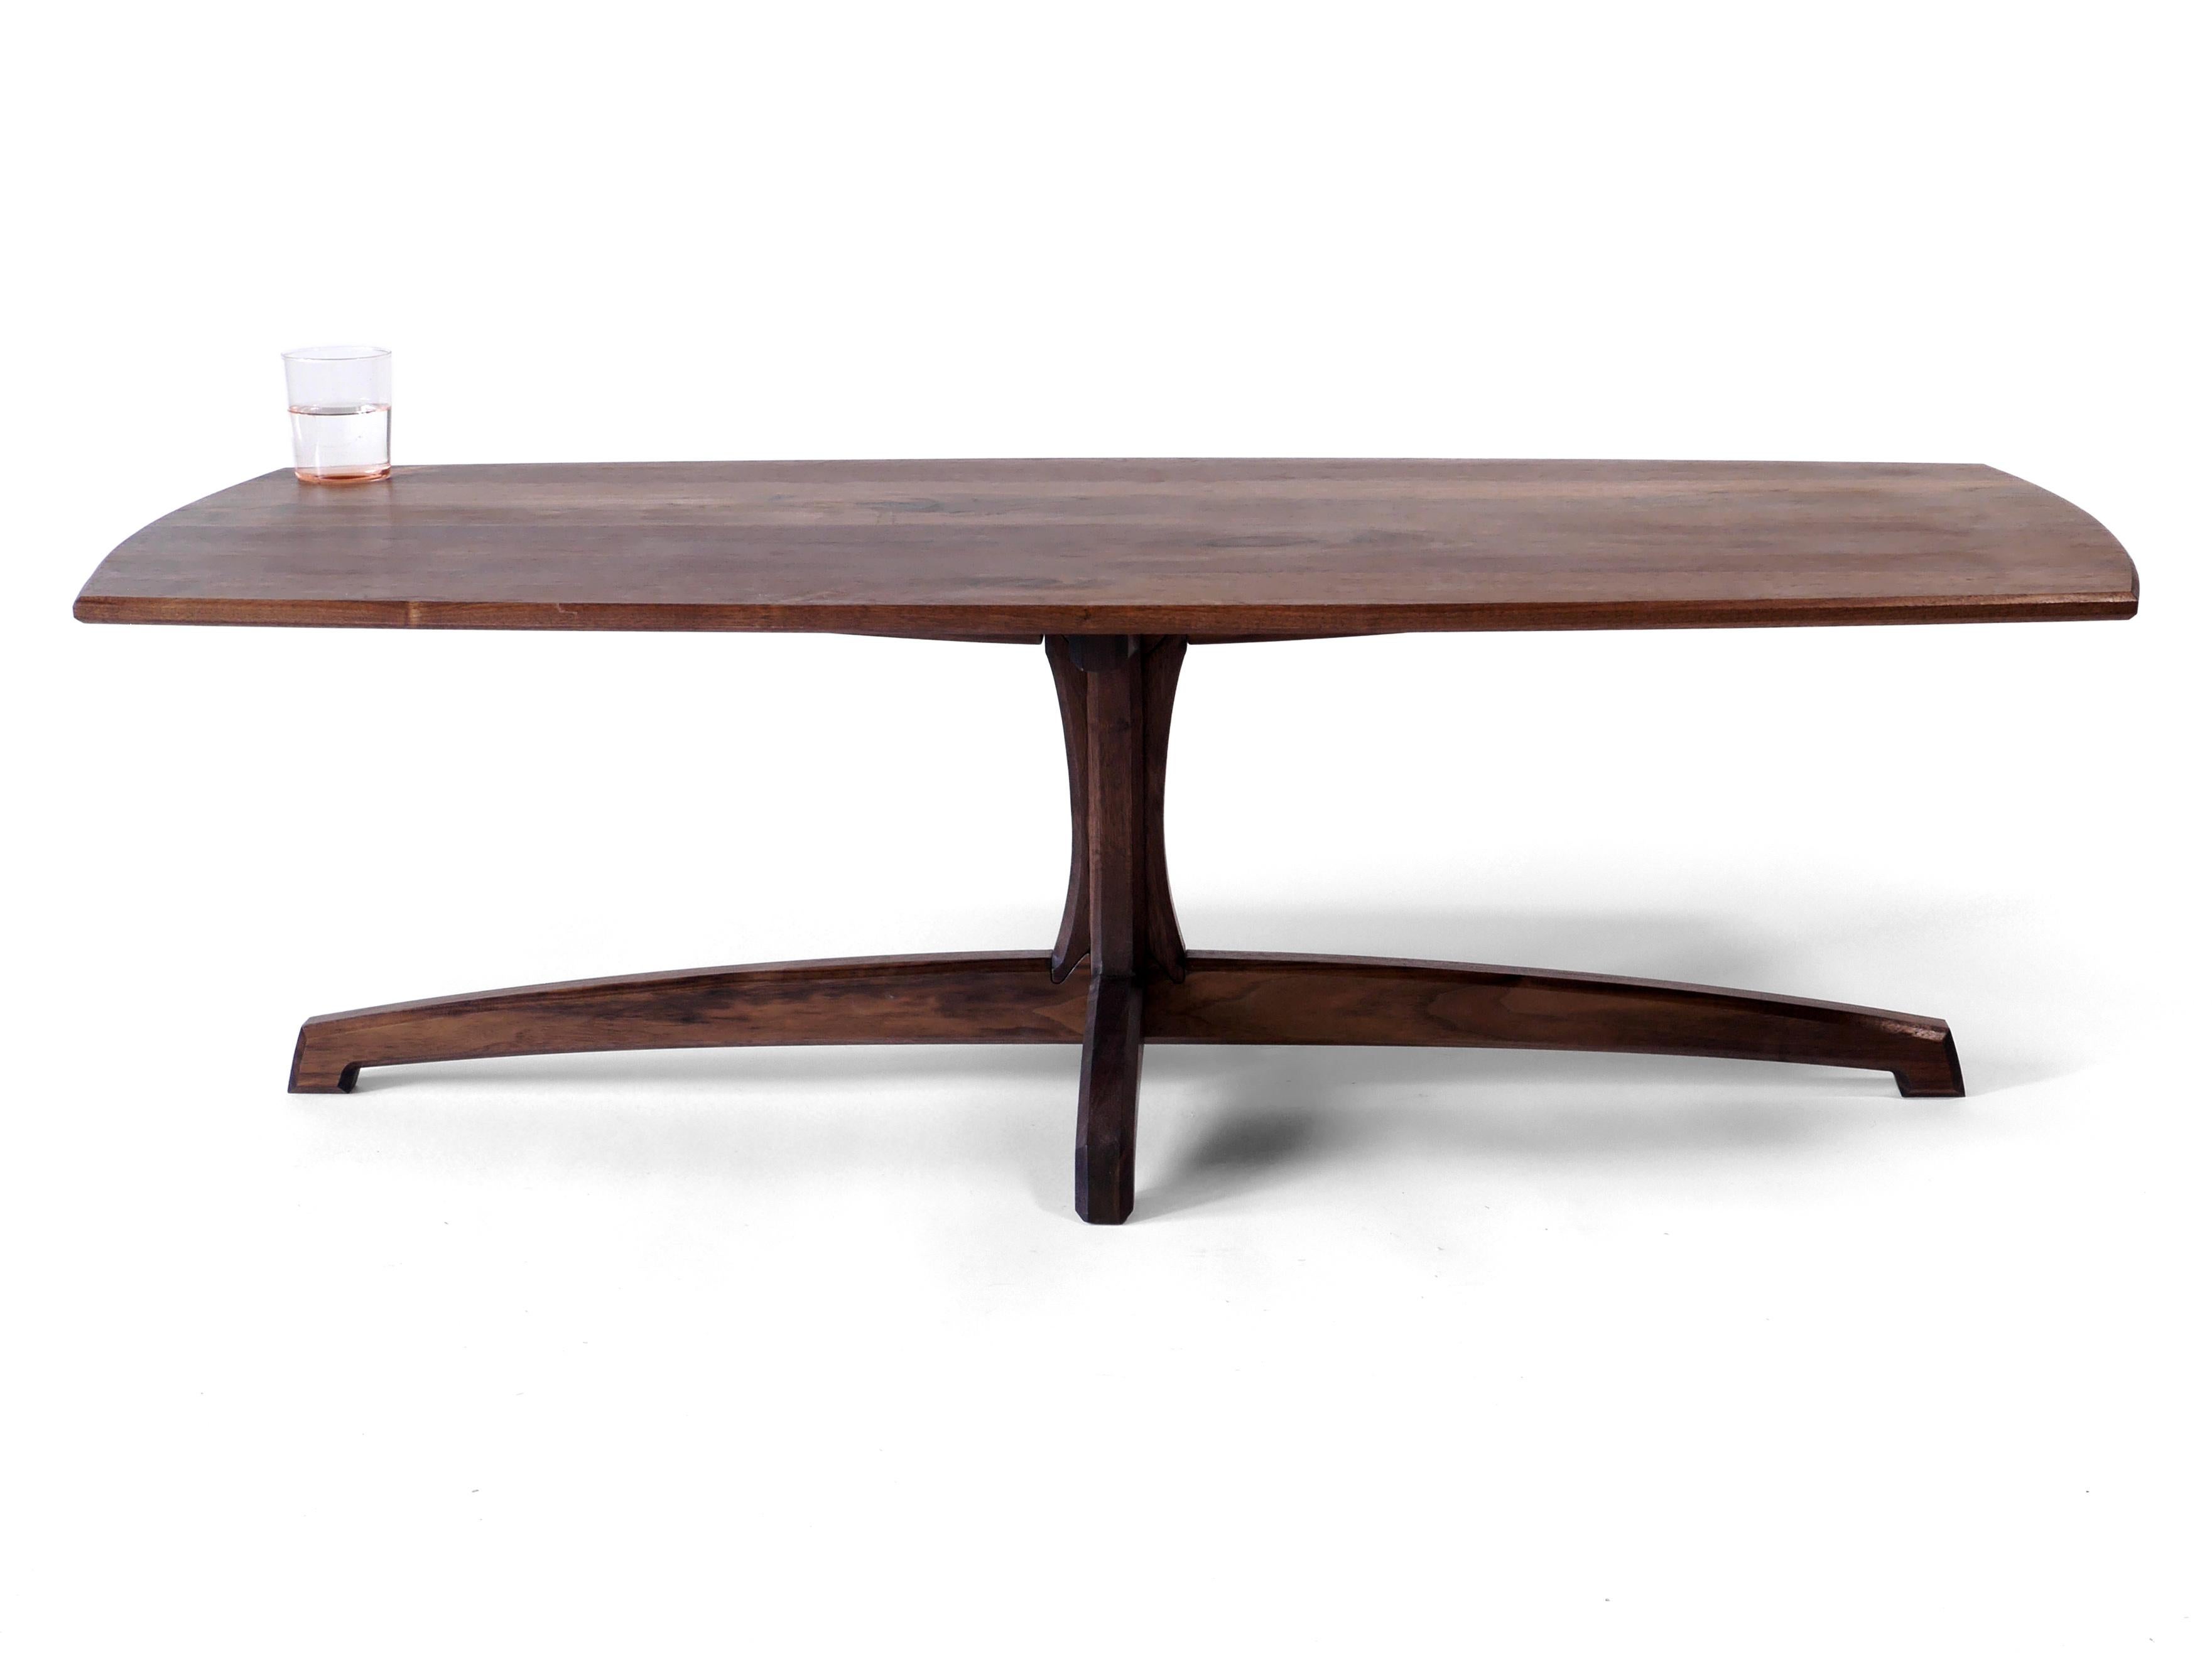 This beautiful Plume Ccoffee table is made out of solid black walnut hardwood and has a detail rich grace highlighted by its simplicity. Each piece is built to order one at a time by master craftspeople in our shop in Albuquerque, NM, and assembled